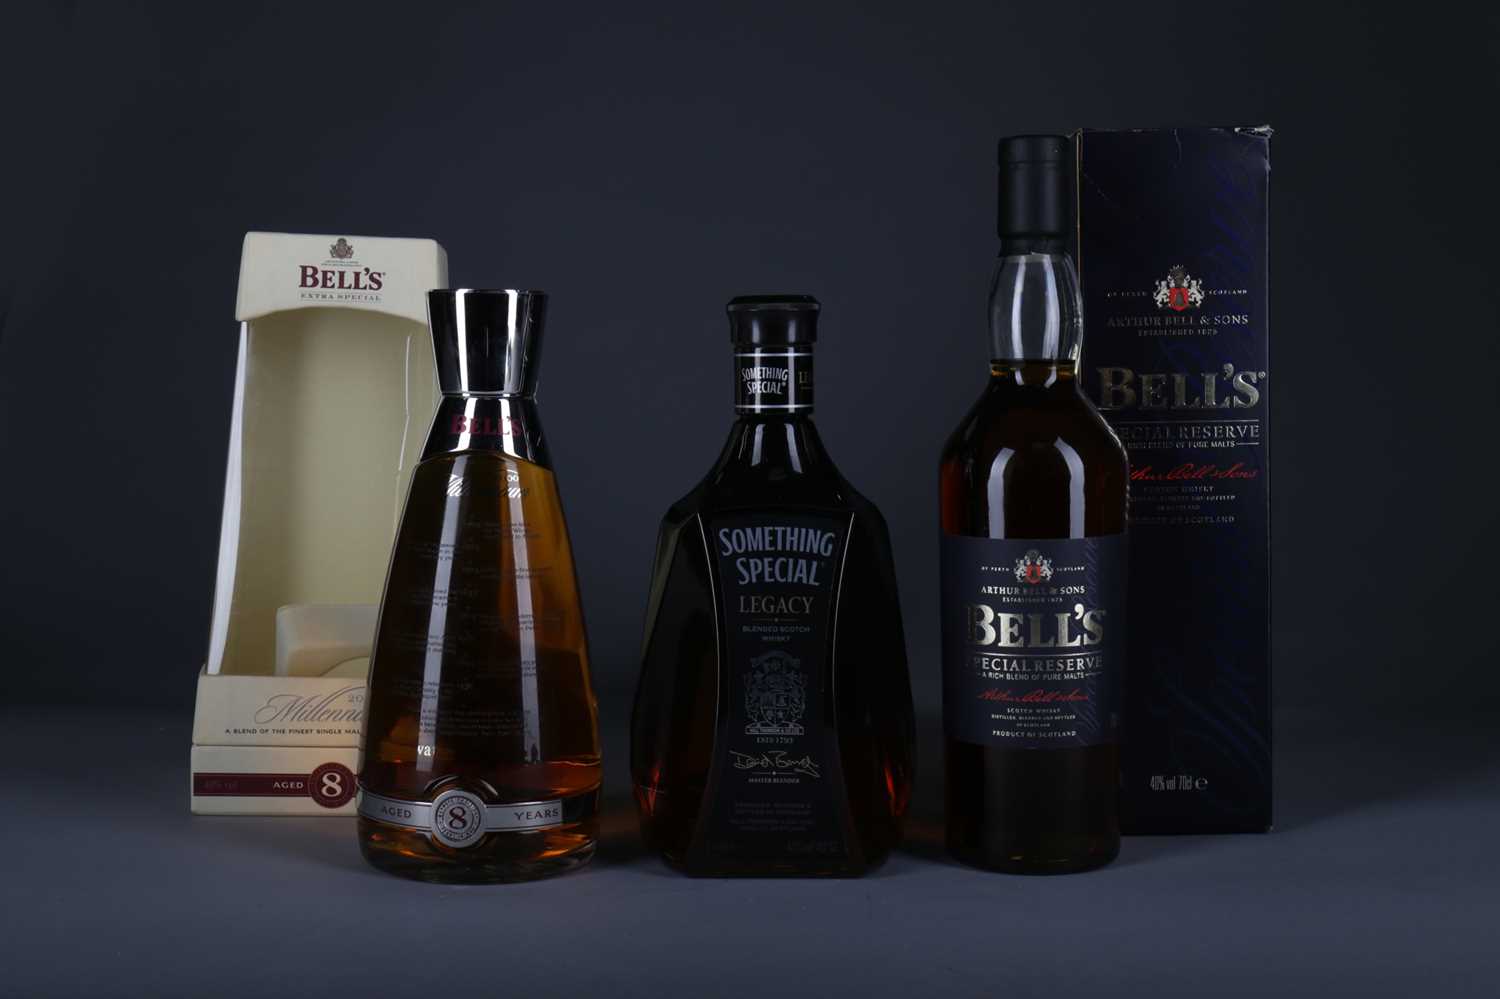 Lot 1291 - BELL'S SPECIAL RESERVE, SOMETHING SPECIAL LEGACY AND BELL'S MILLENNIUM DECANTER